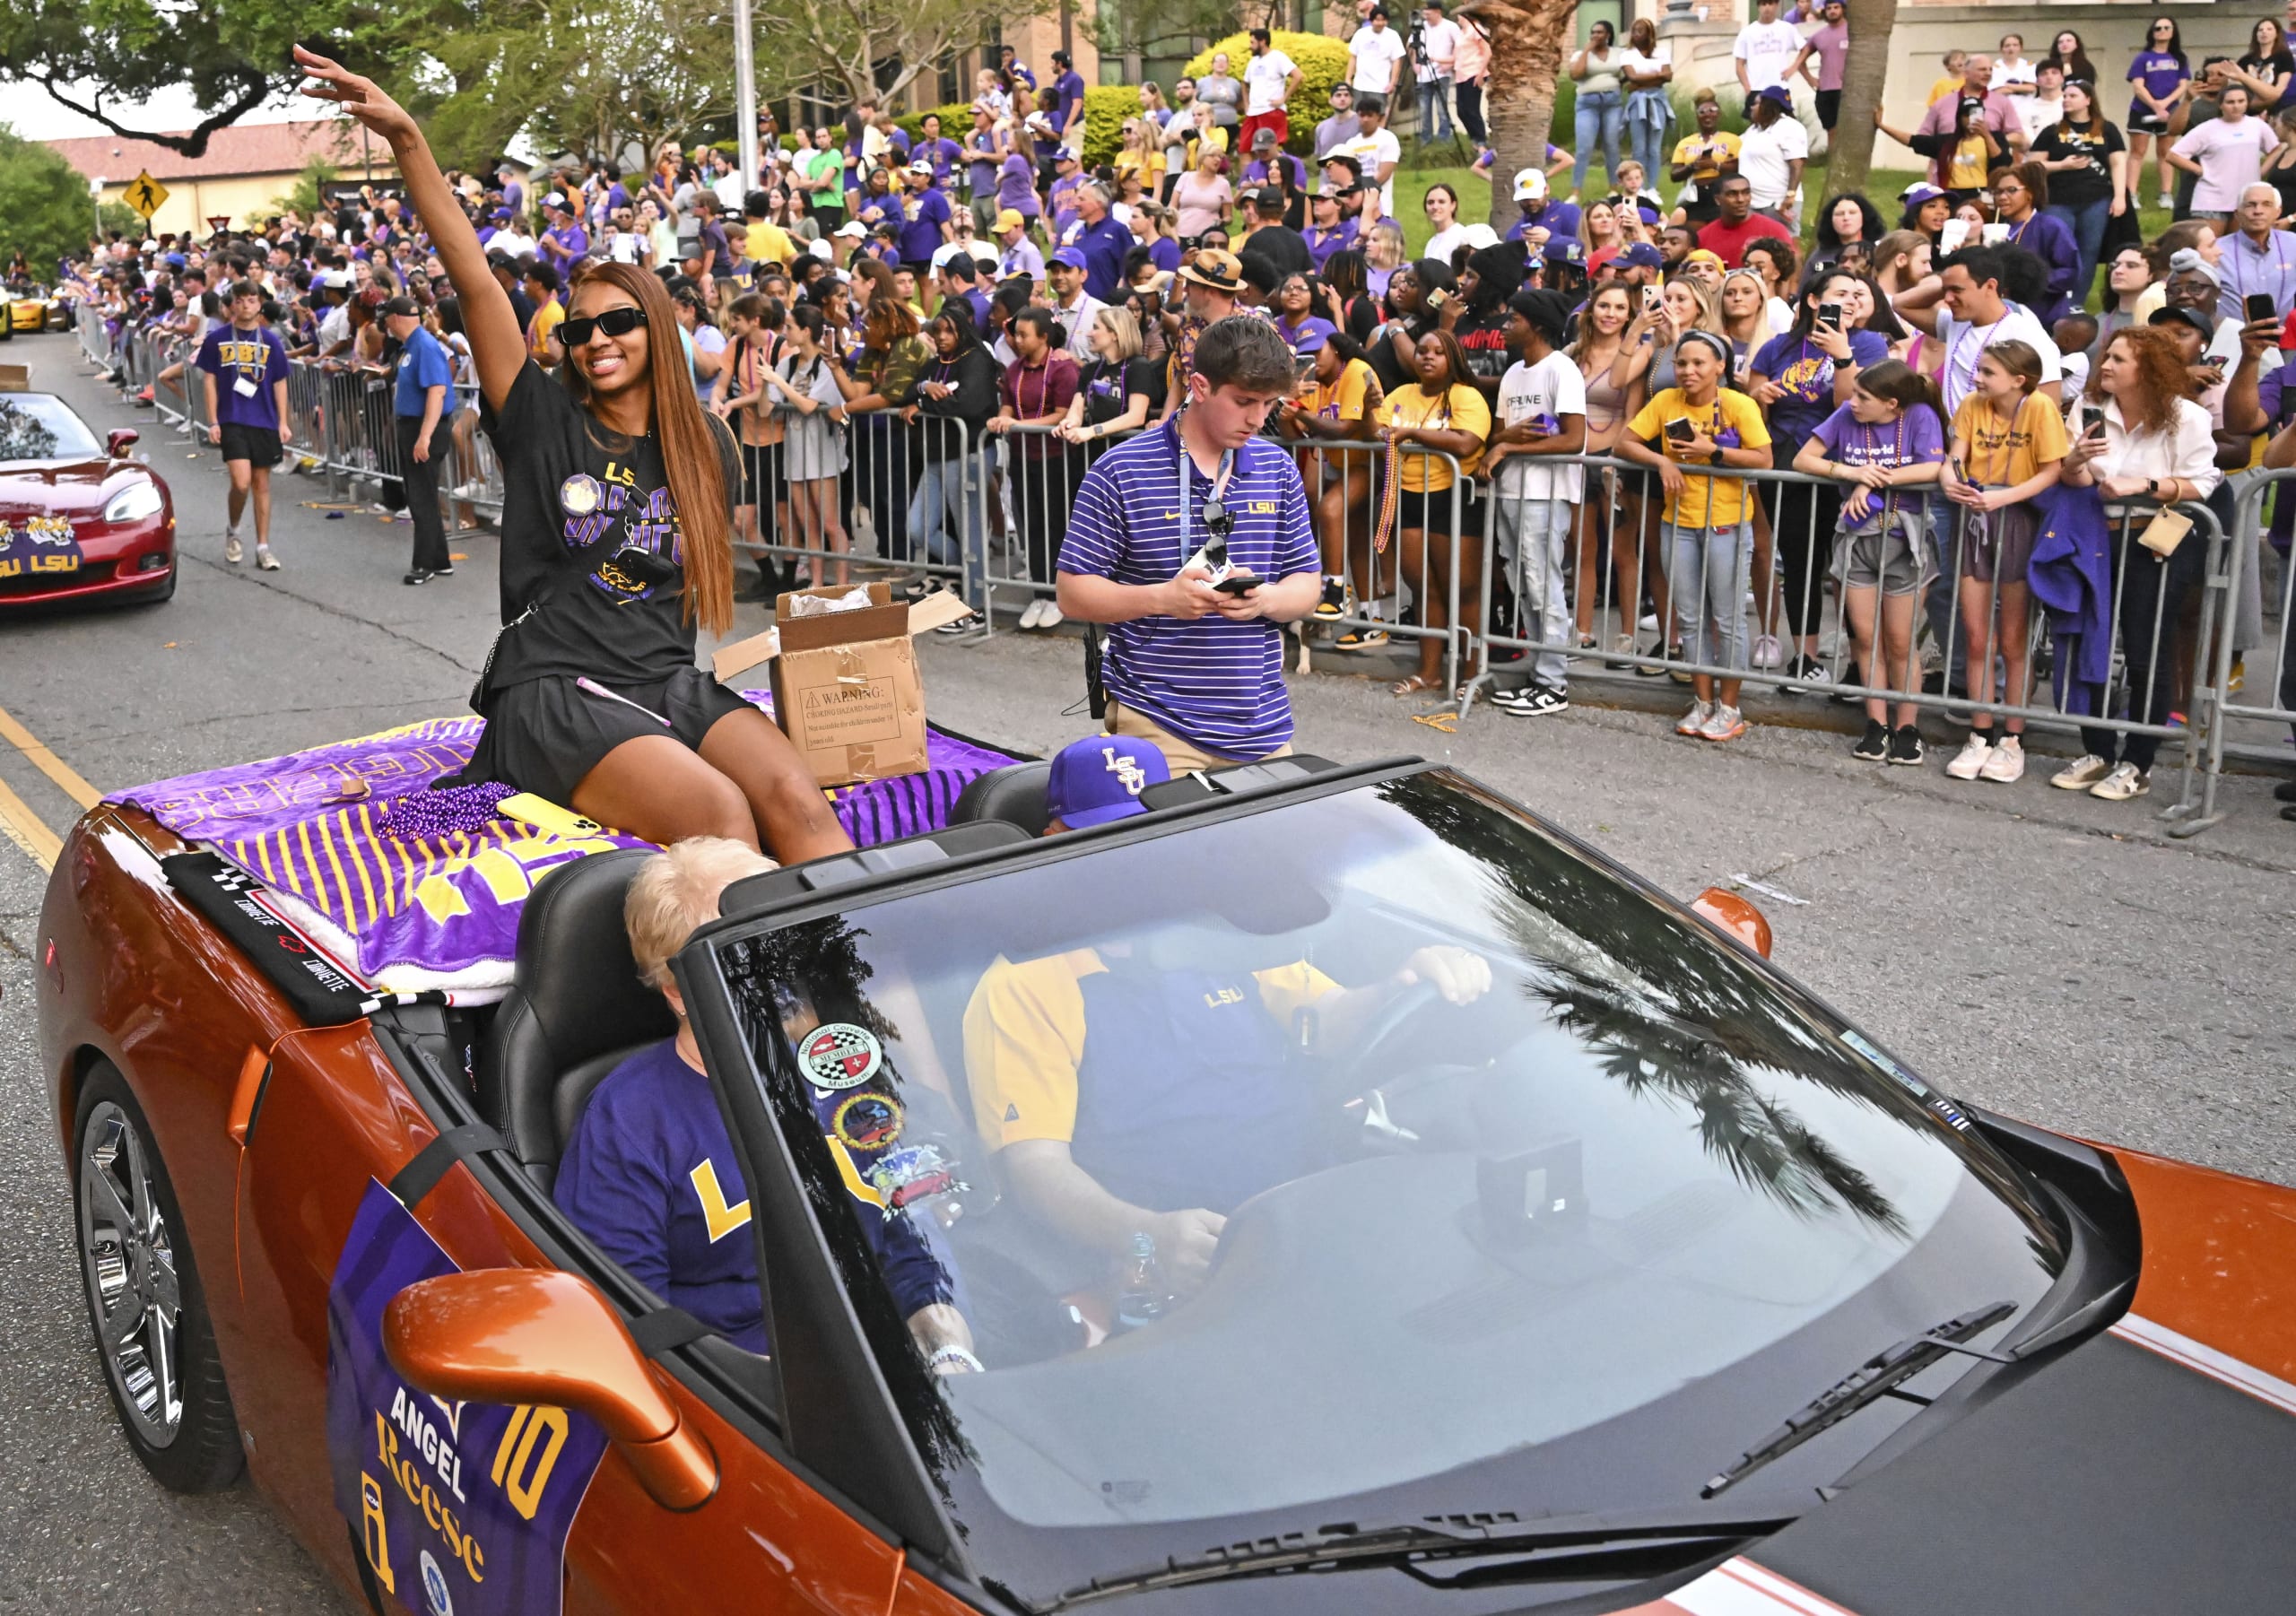 Champ LSU going to White House even if star player doesn’t